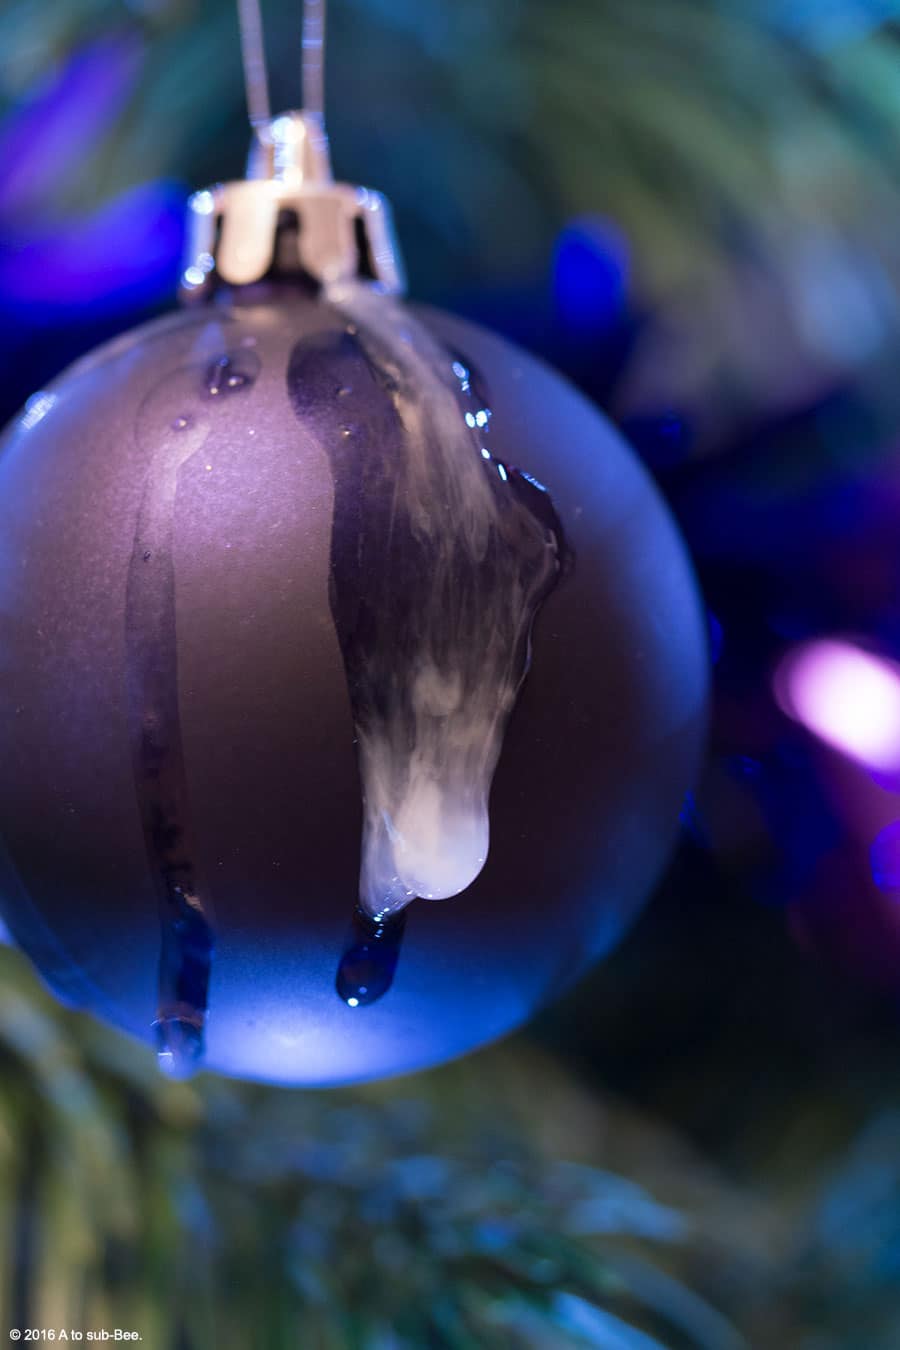 The Keeper cum dripping from a purple baubel on the Christmas tree as a play on Oh Come all ye Faithful